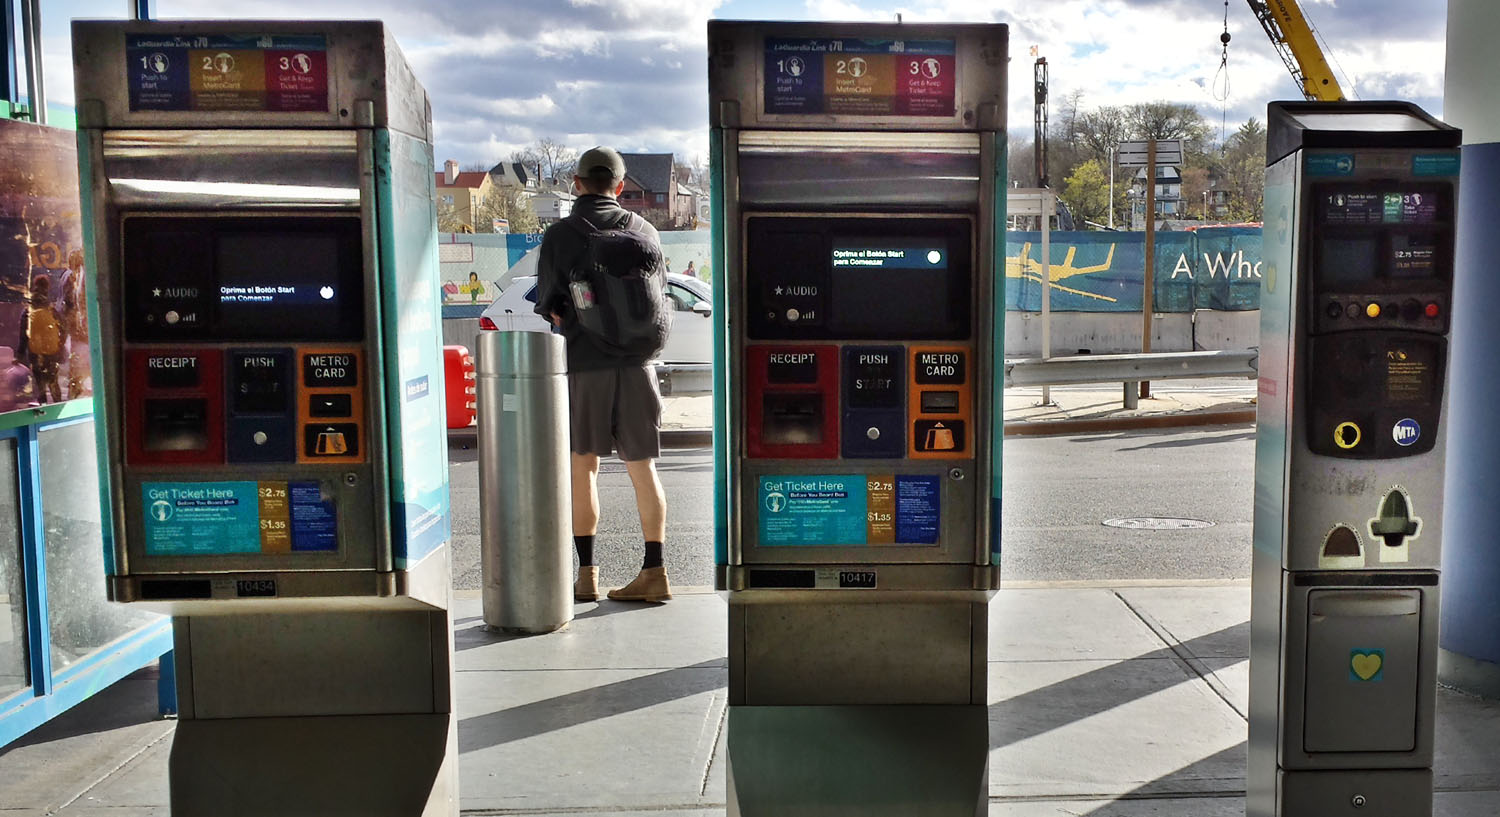 Ticket Machines for Select Bus Service at LGA